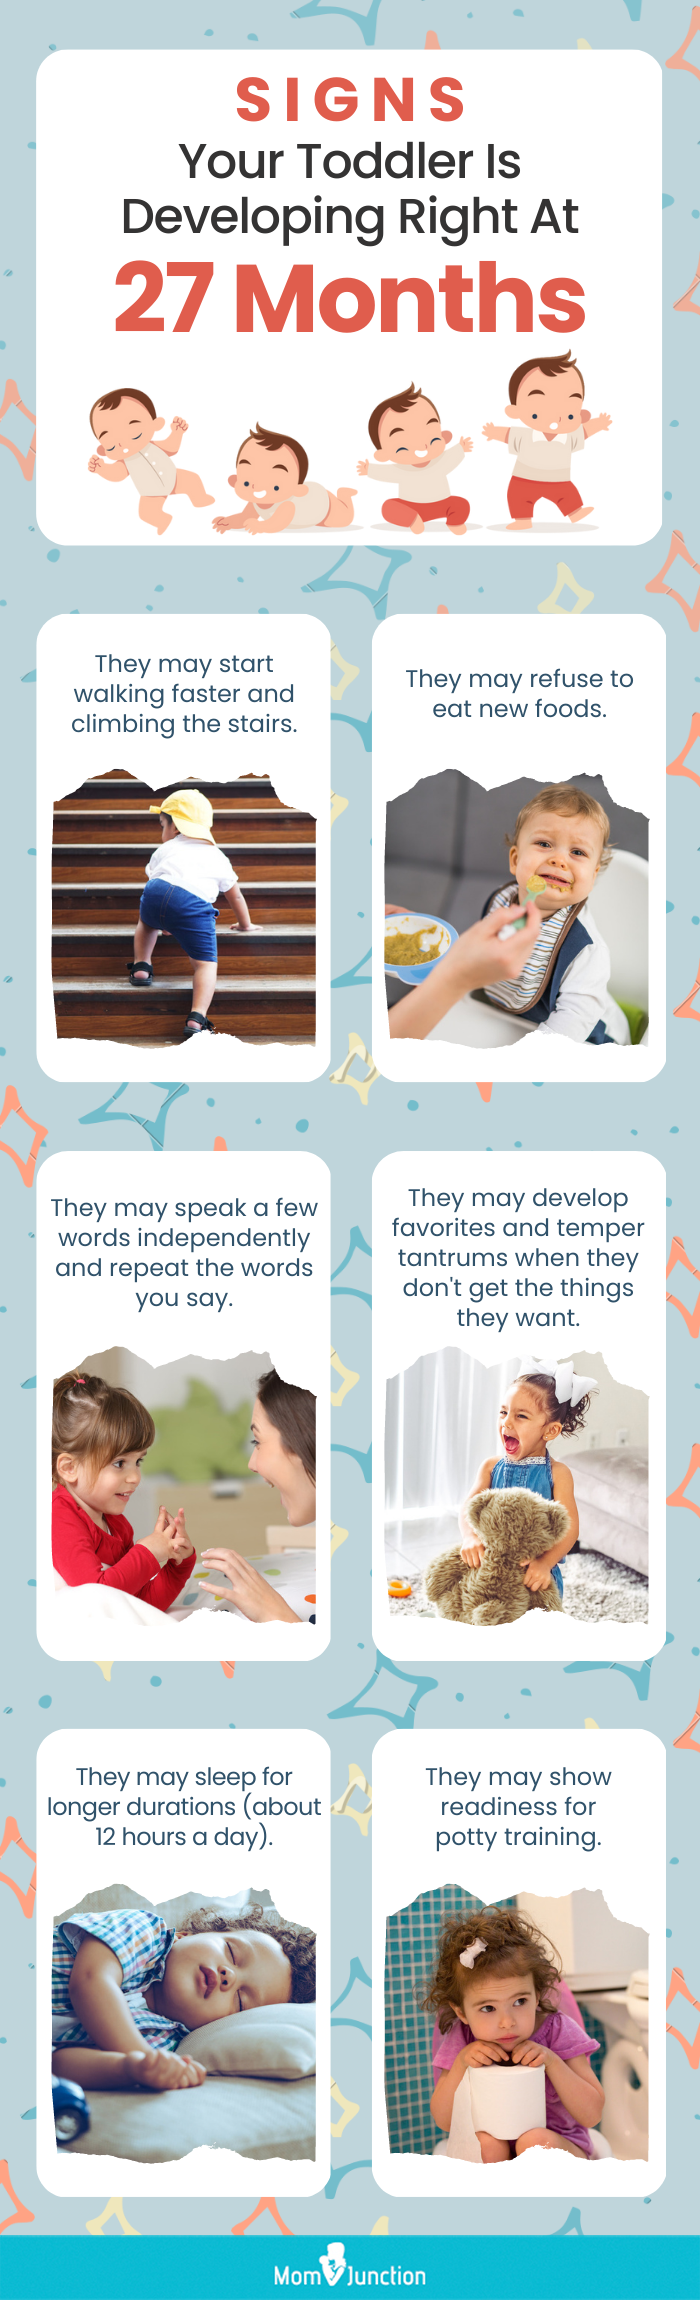 signs your toddler is developing right at 27 months (infographic)